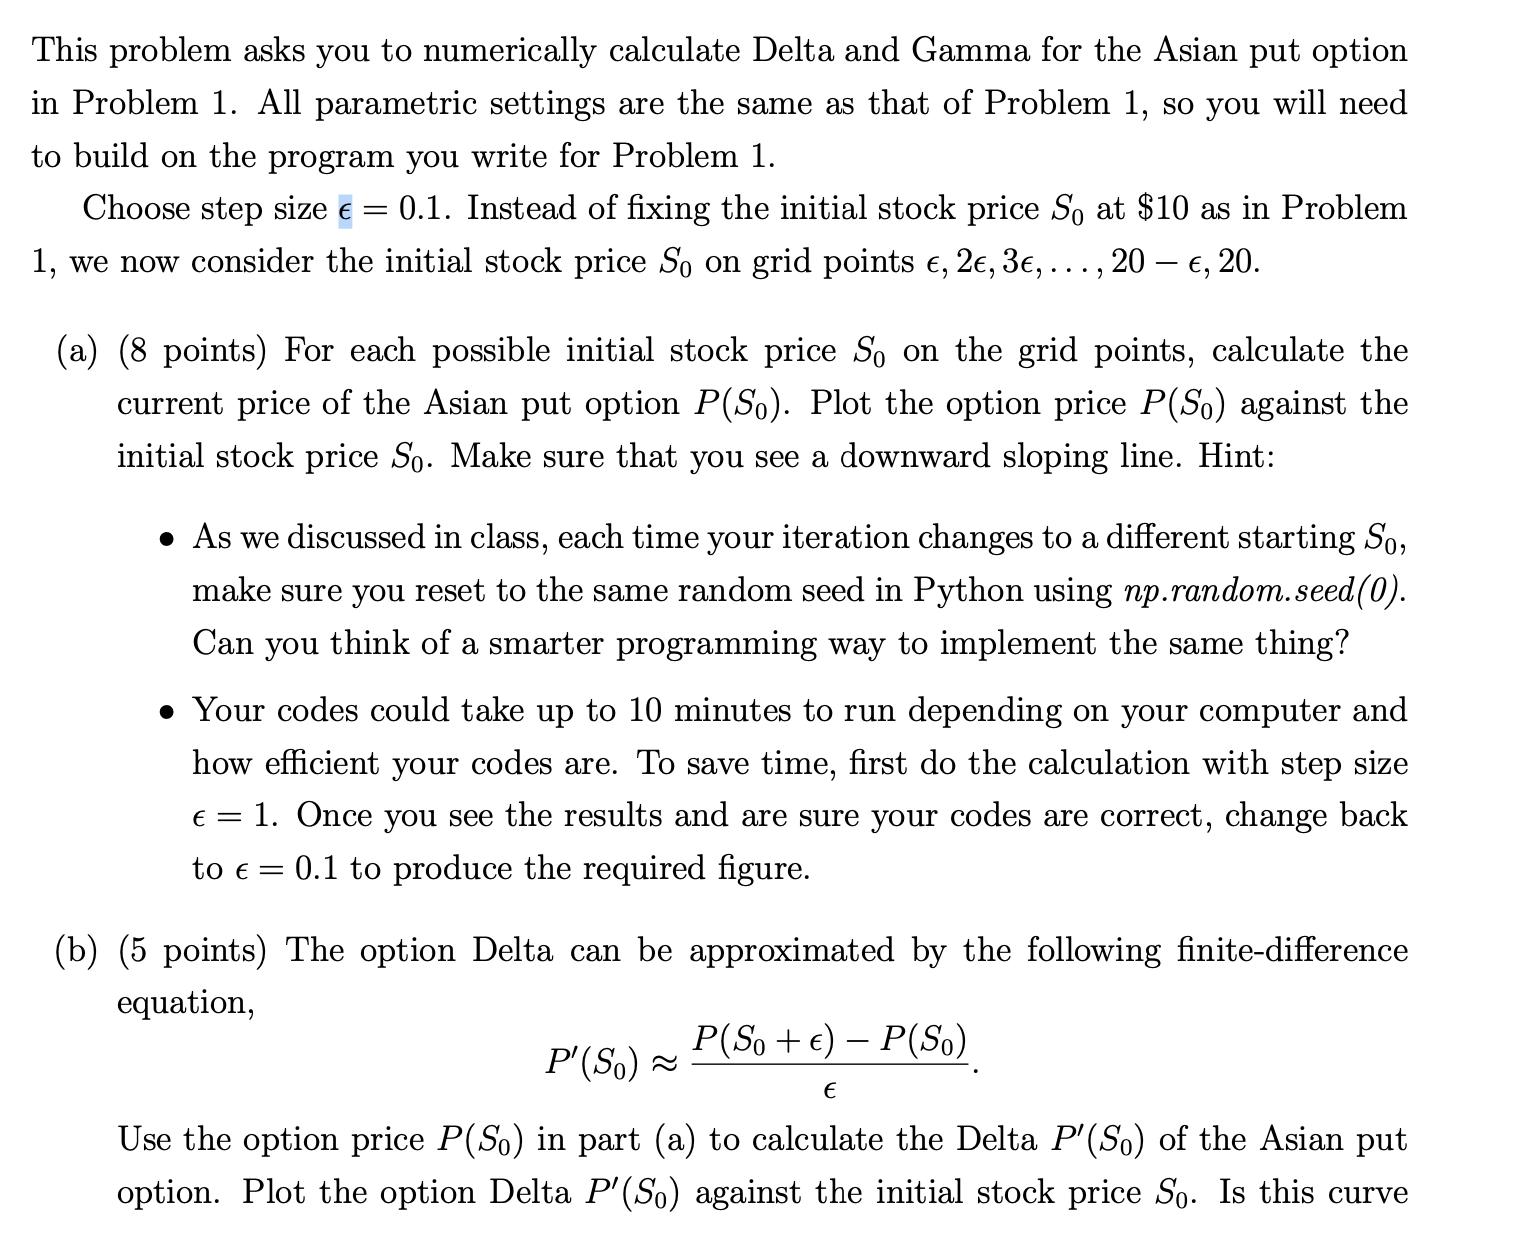 This problem asks you to numerically calculate Delta and Gamma for the Asian put option in Problem 1. All